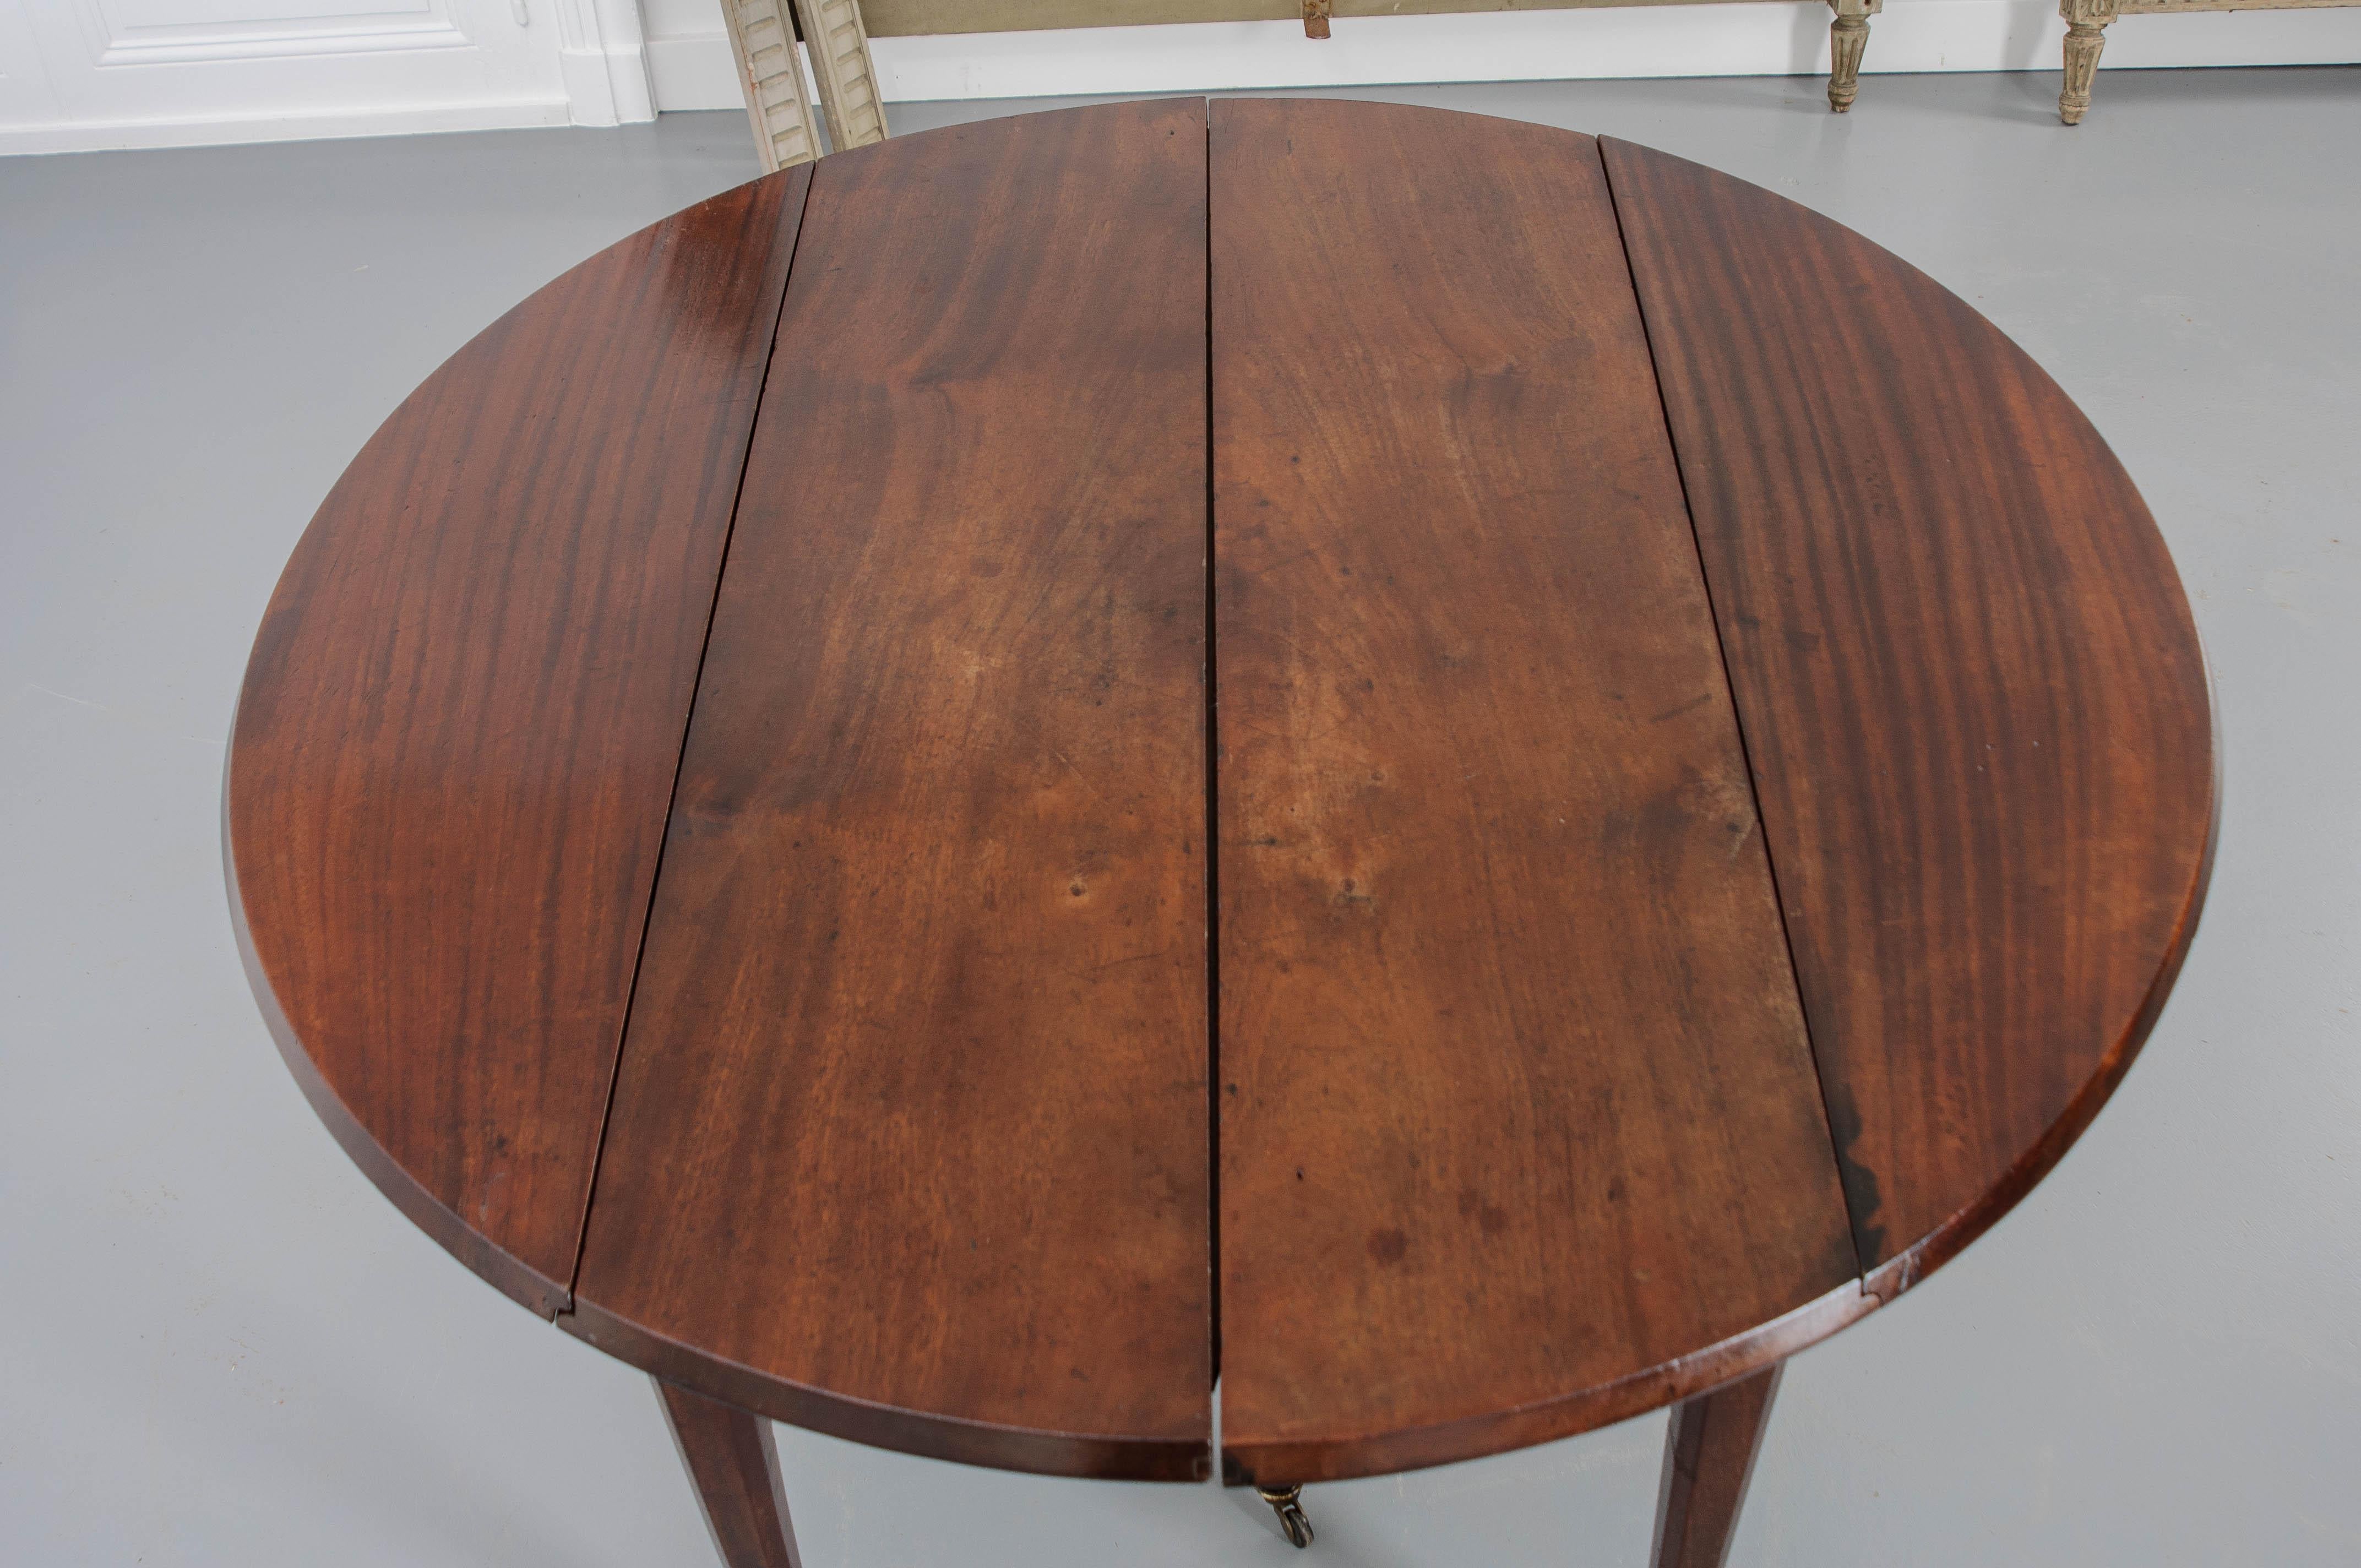 A beautiful French drop leaf dining table. The top sits over a simple apron supported with four tapered legs on sabot feet with brass casters. Each drop leaf has a wood support that pulls out from under the table. The dimensions of the tables with